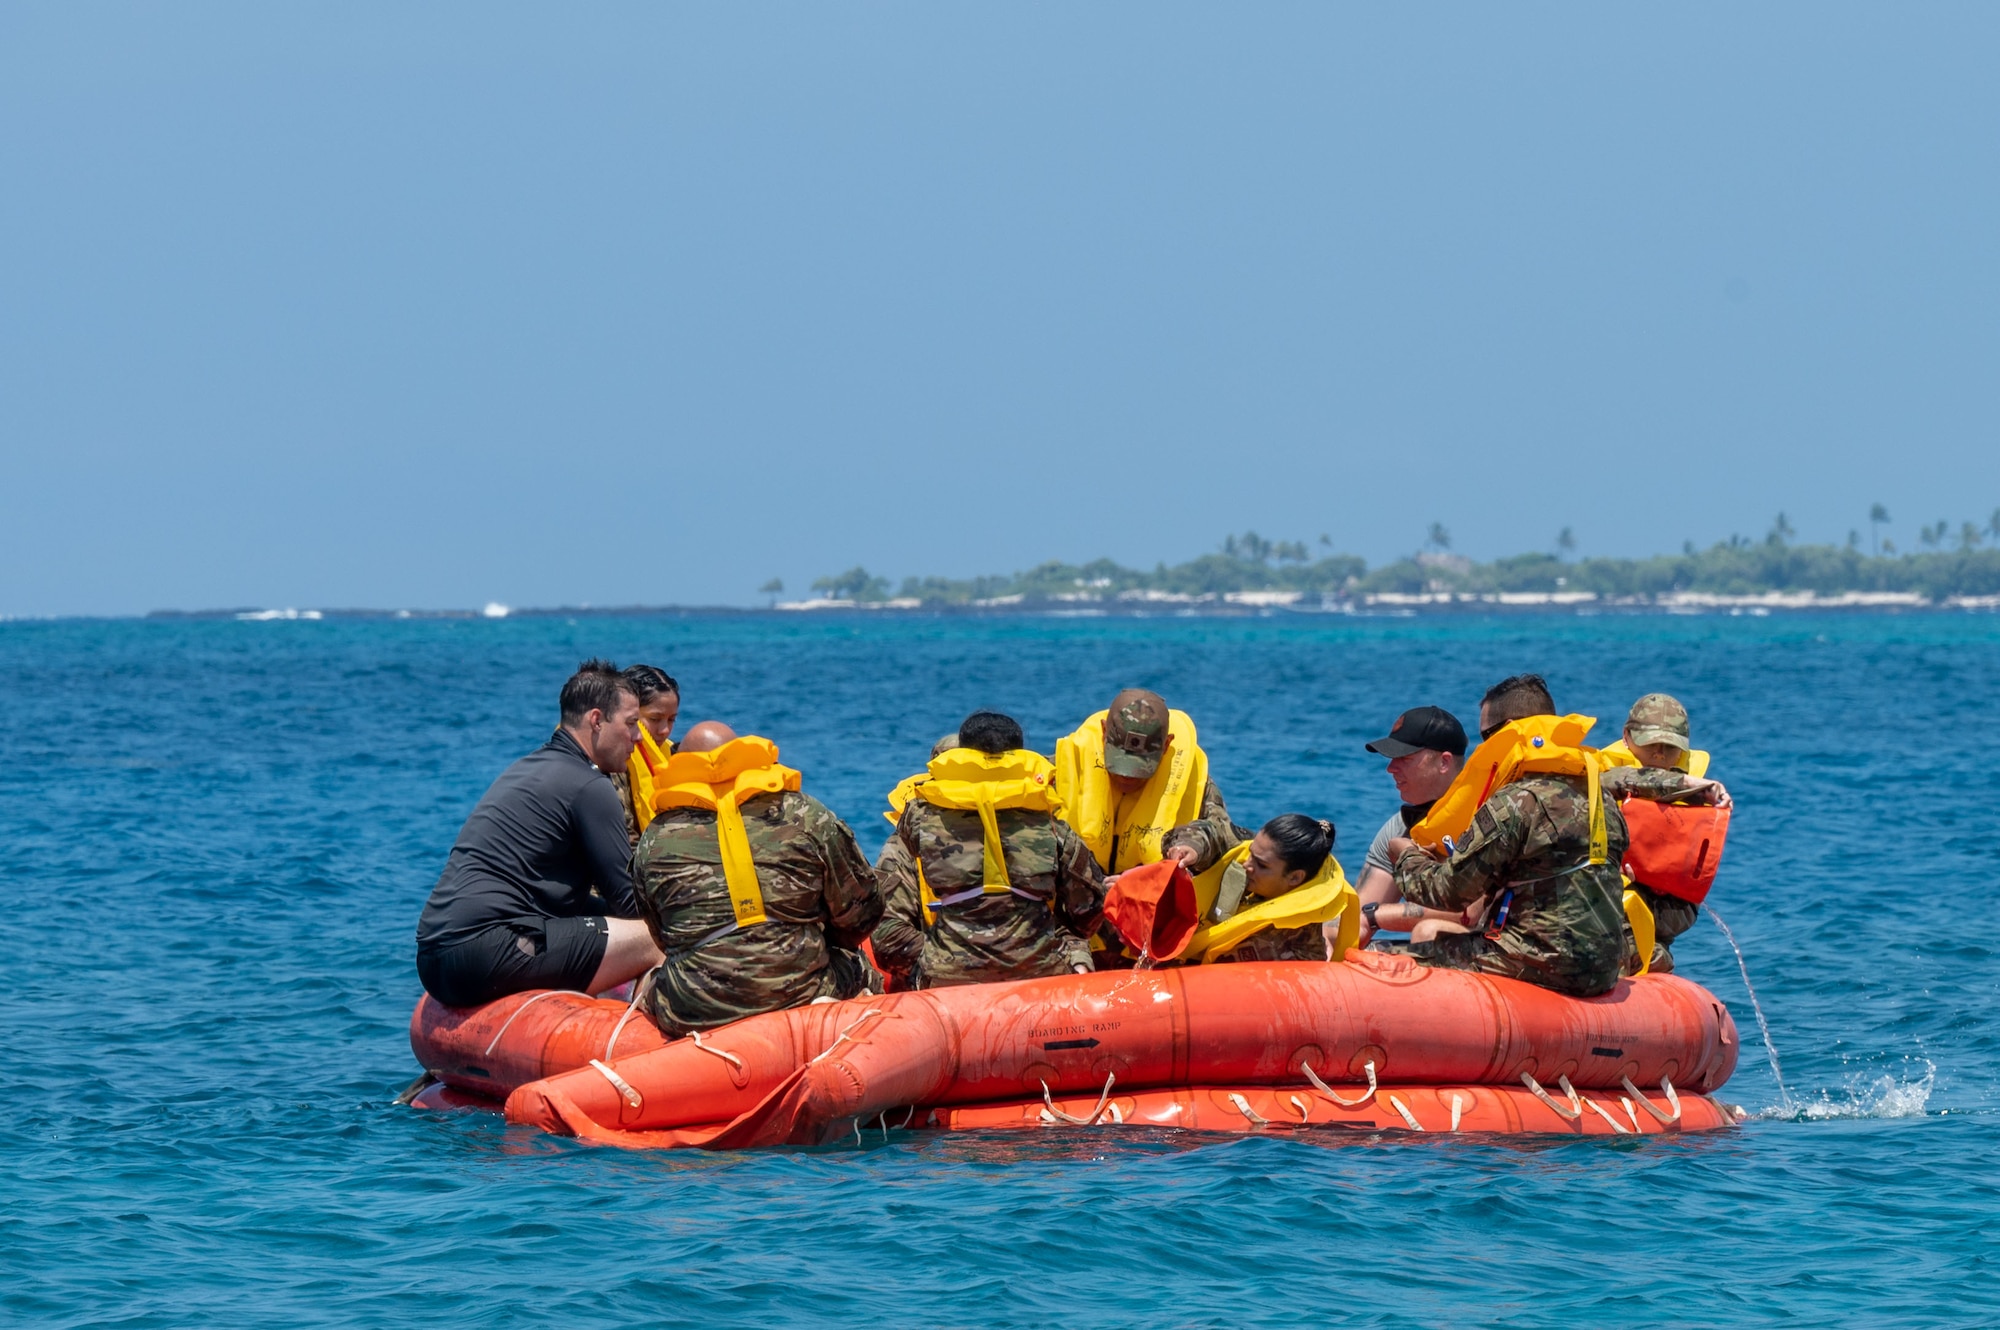 people in military uniforms and yellow life vests float in an orange life raft in the water